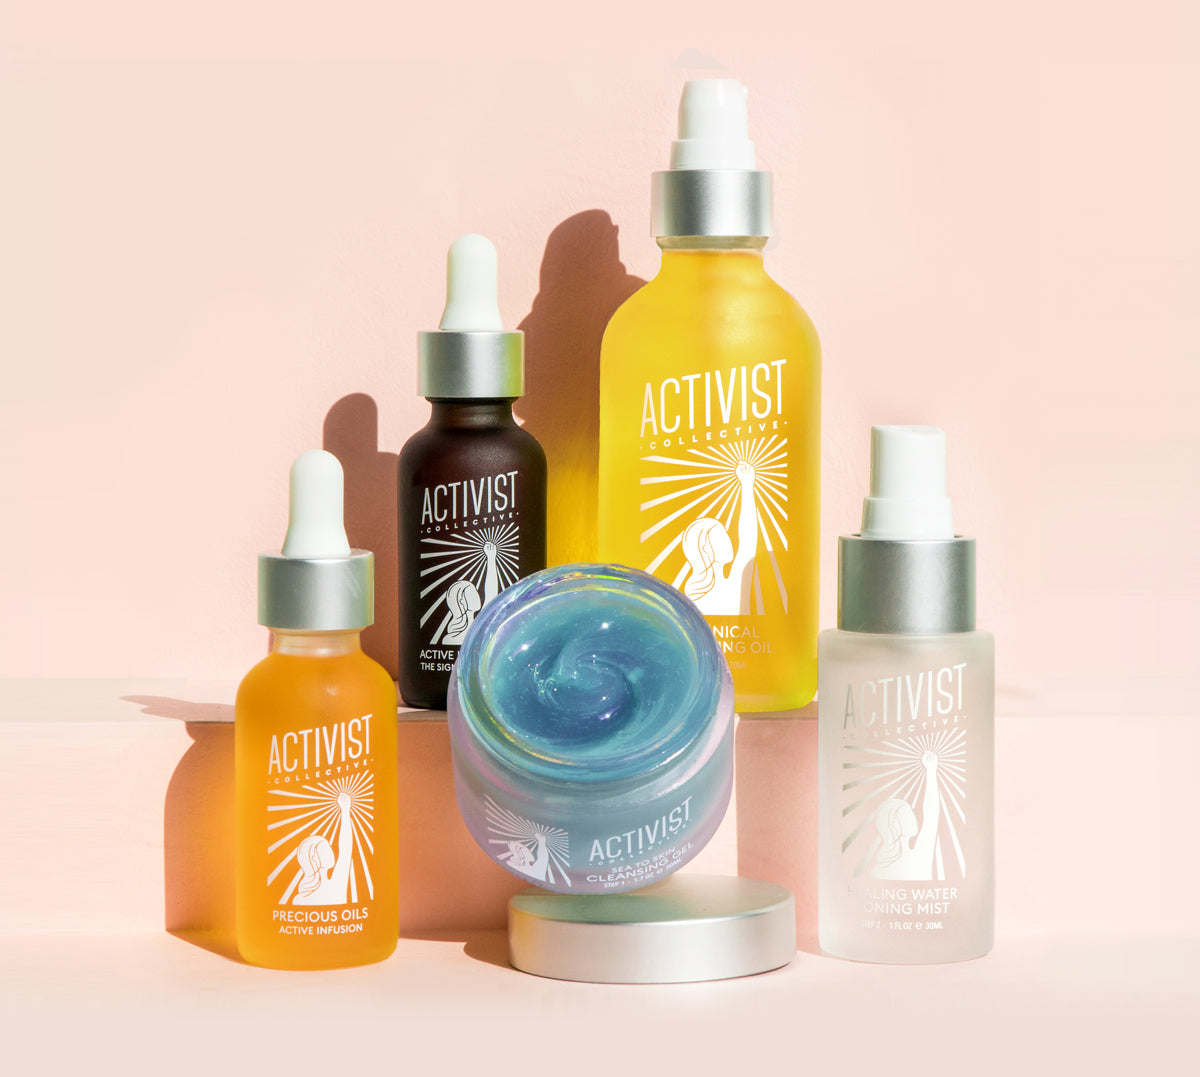 Activist Skincare: Our 4-Step Method for the Best Skin of Your Life